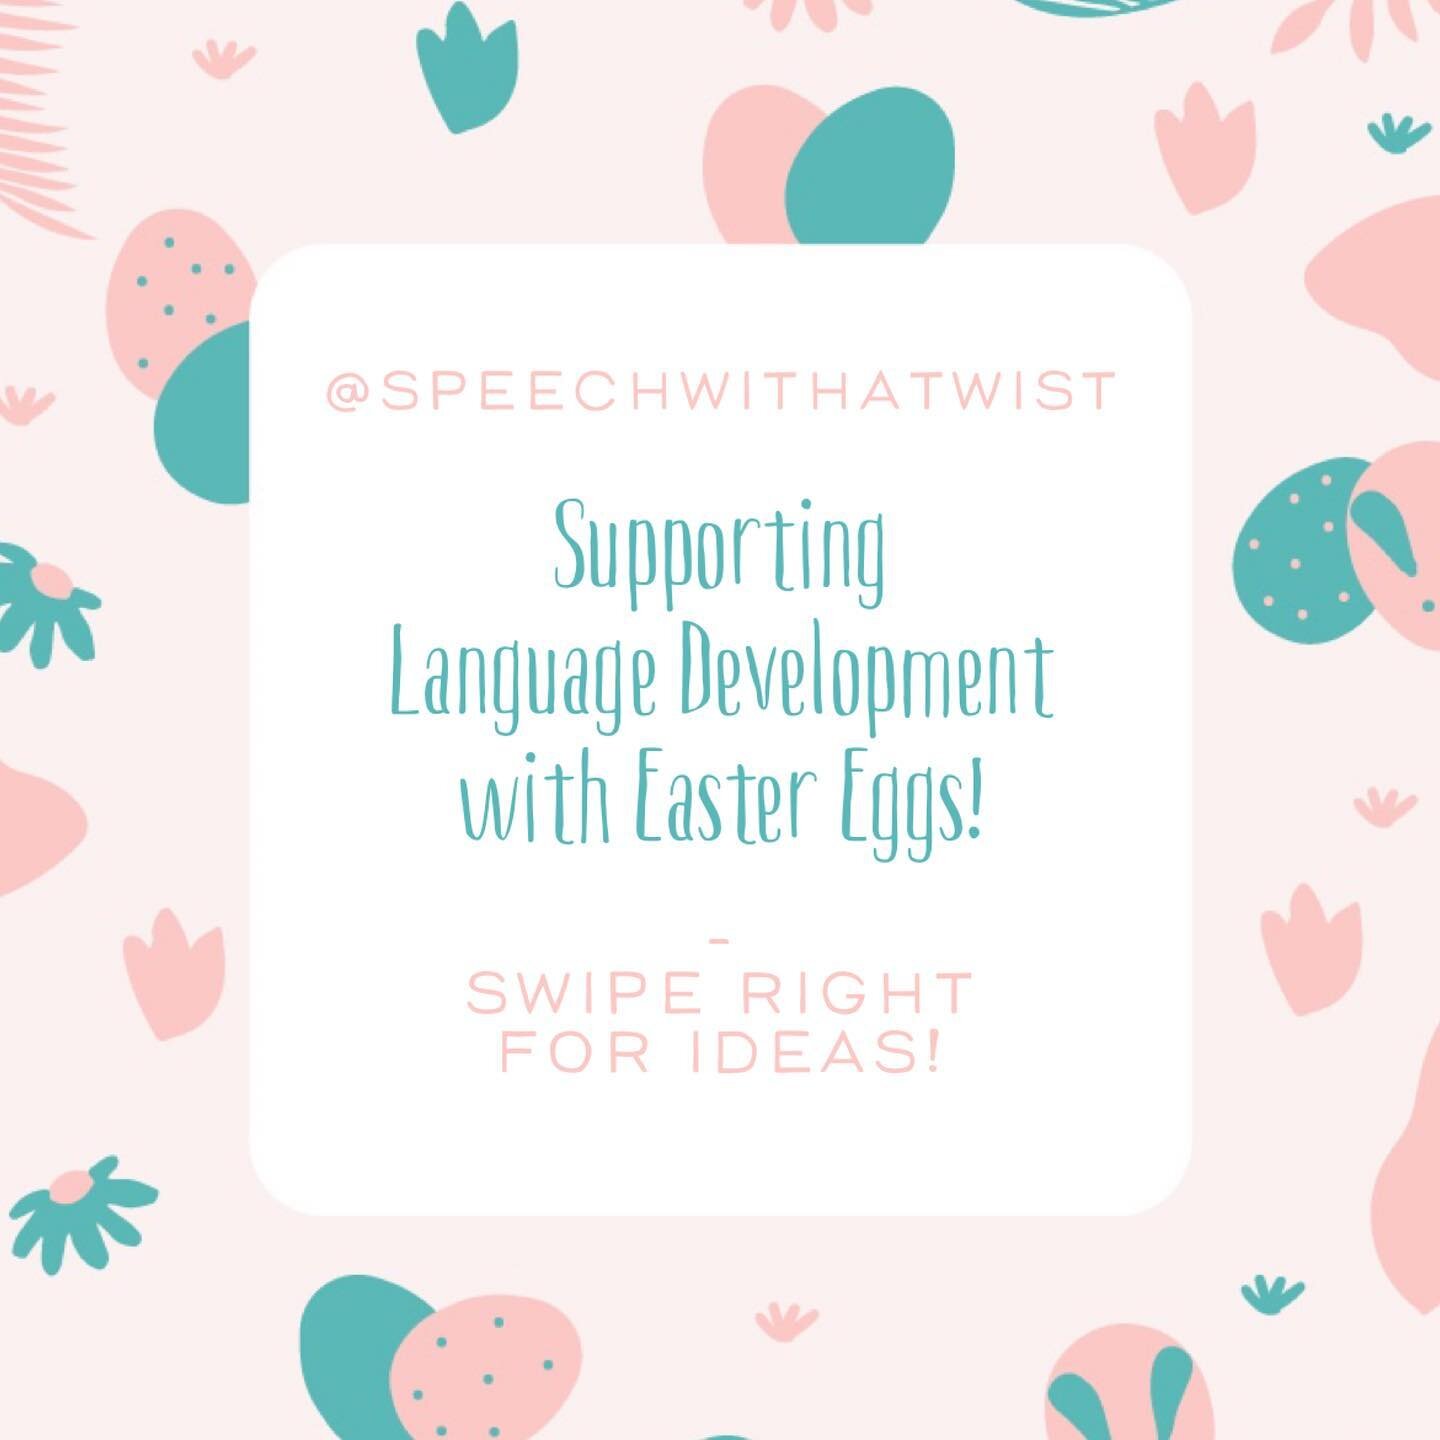 SLPs 🫶🏼 Easter Eggs! 

Easter eggs are soooo exciting for children because they only come around once a year and they know that there is something FUN hiding inside! 

Support Language Development by: 
🌸 teaching or reinforcing vocabulary words! 
